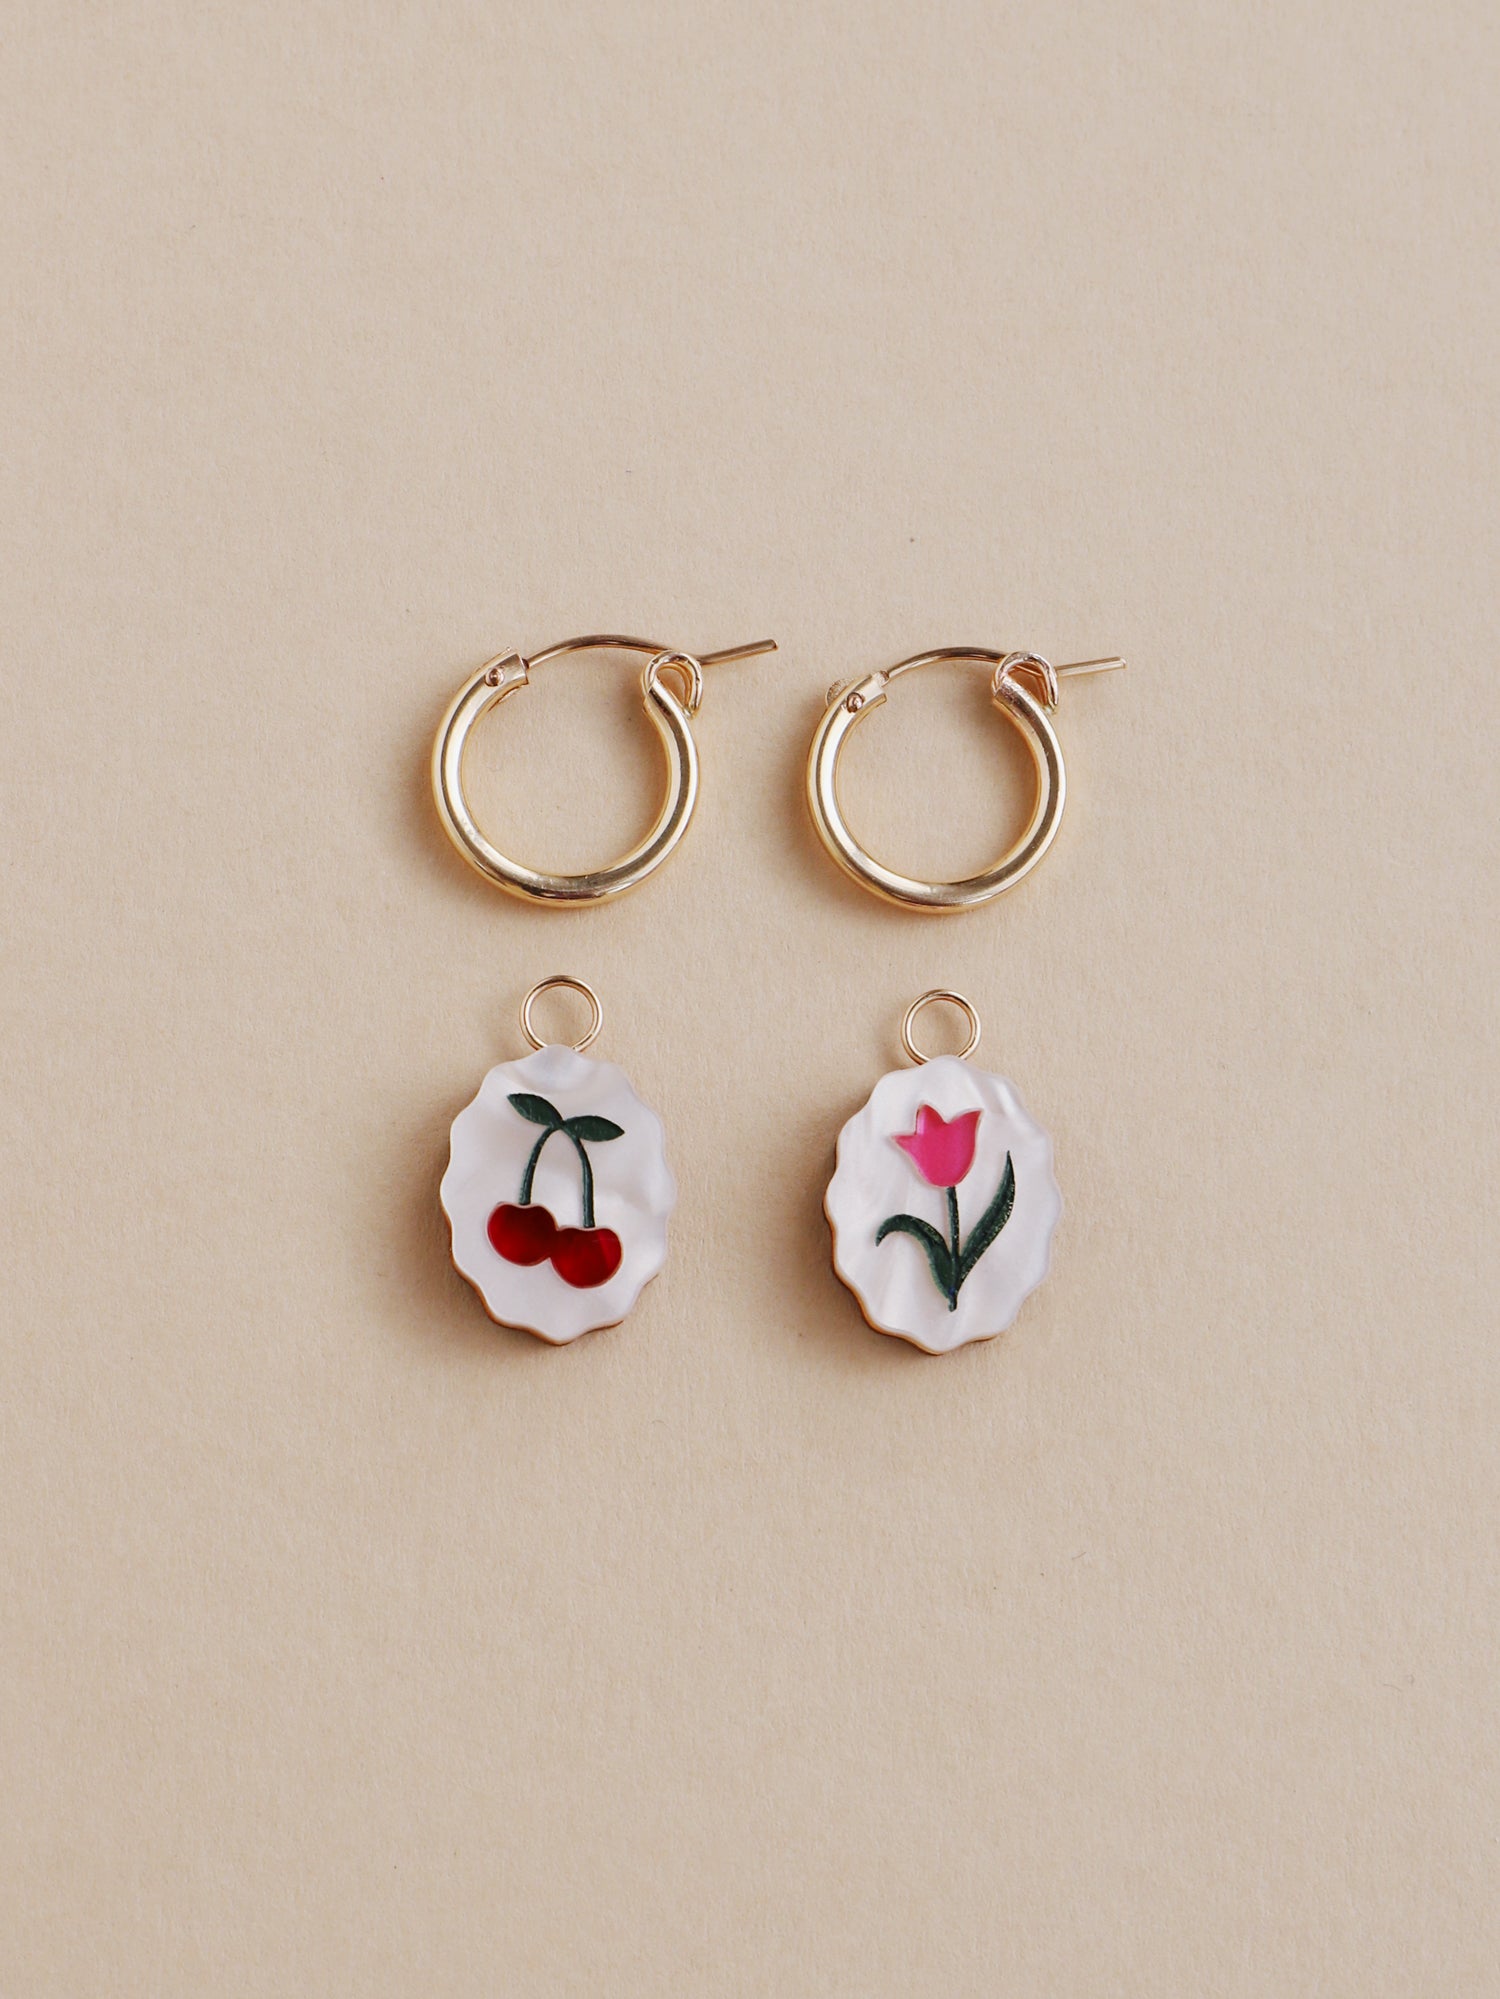 Tulip and cherry charm hoop earrings. Made from acrylic and 14k gold-filled hoops & findings.  Handmade in the UK by Wolf & Moon.